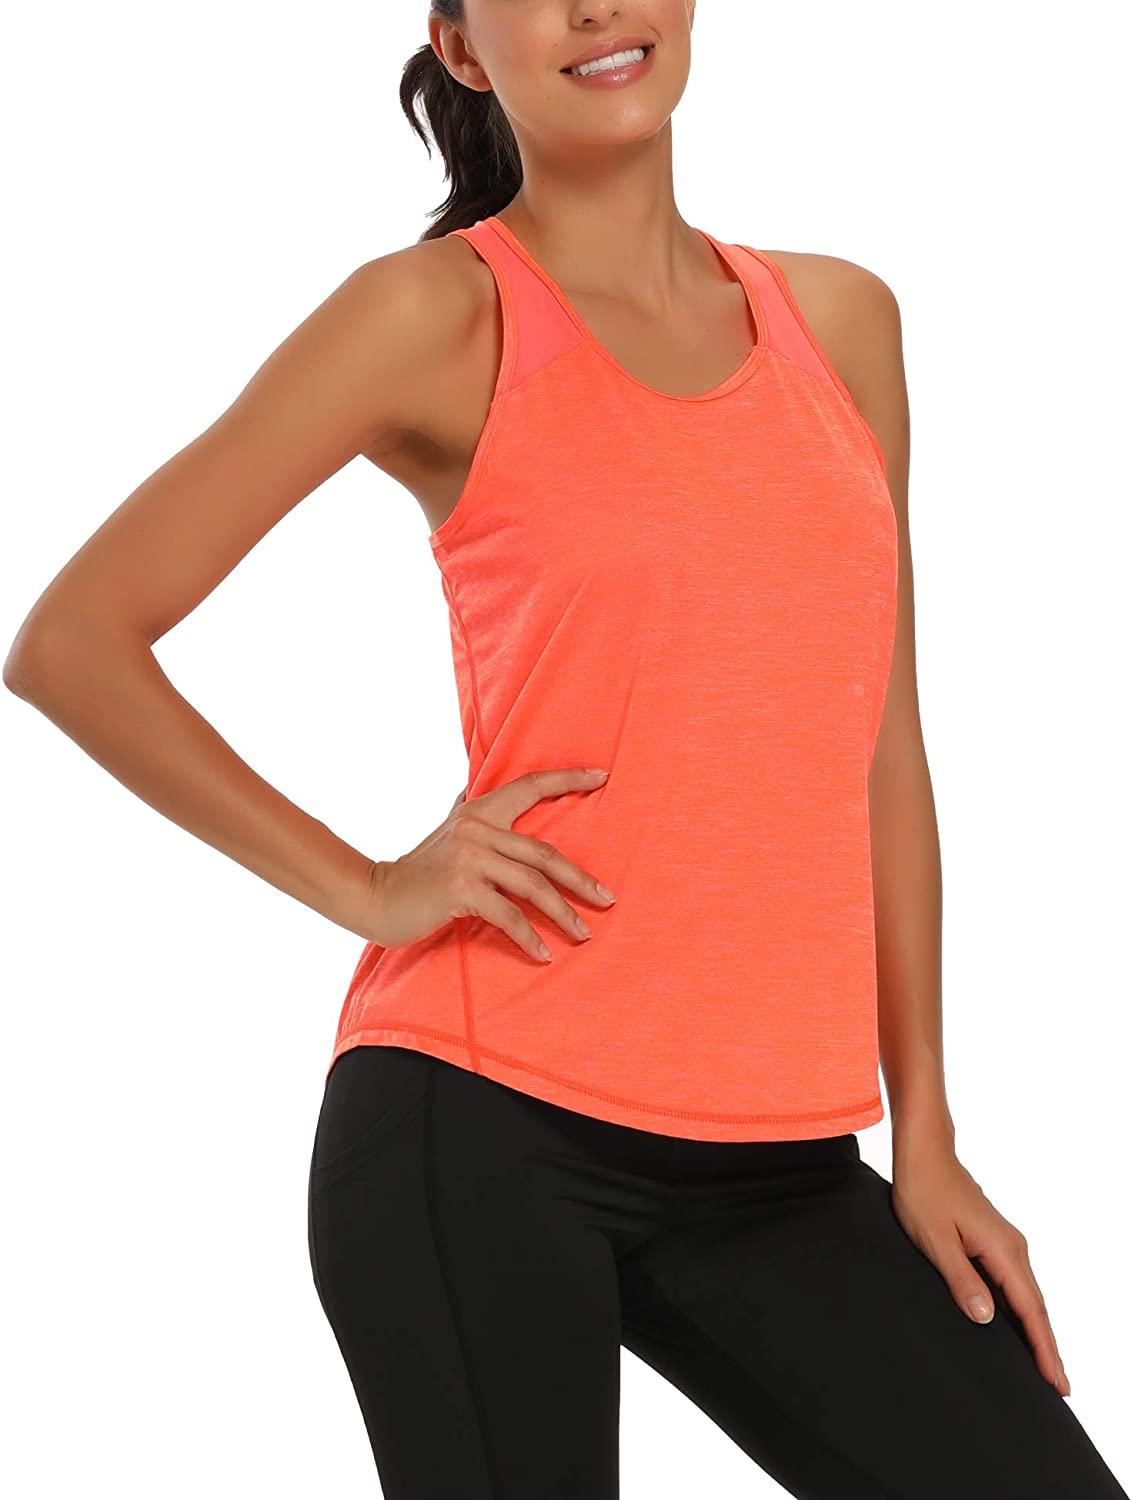 Racerback Tank Tops for Women Workout Tops Sleeveless Athletic